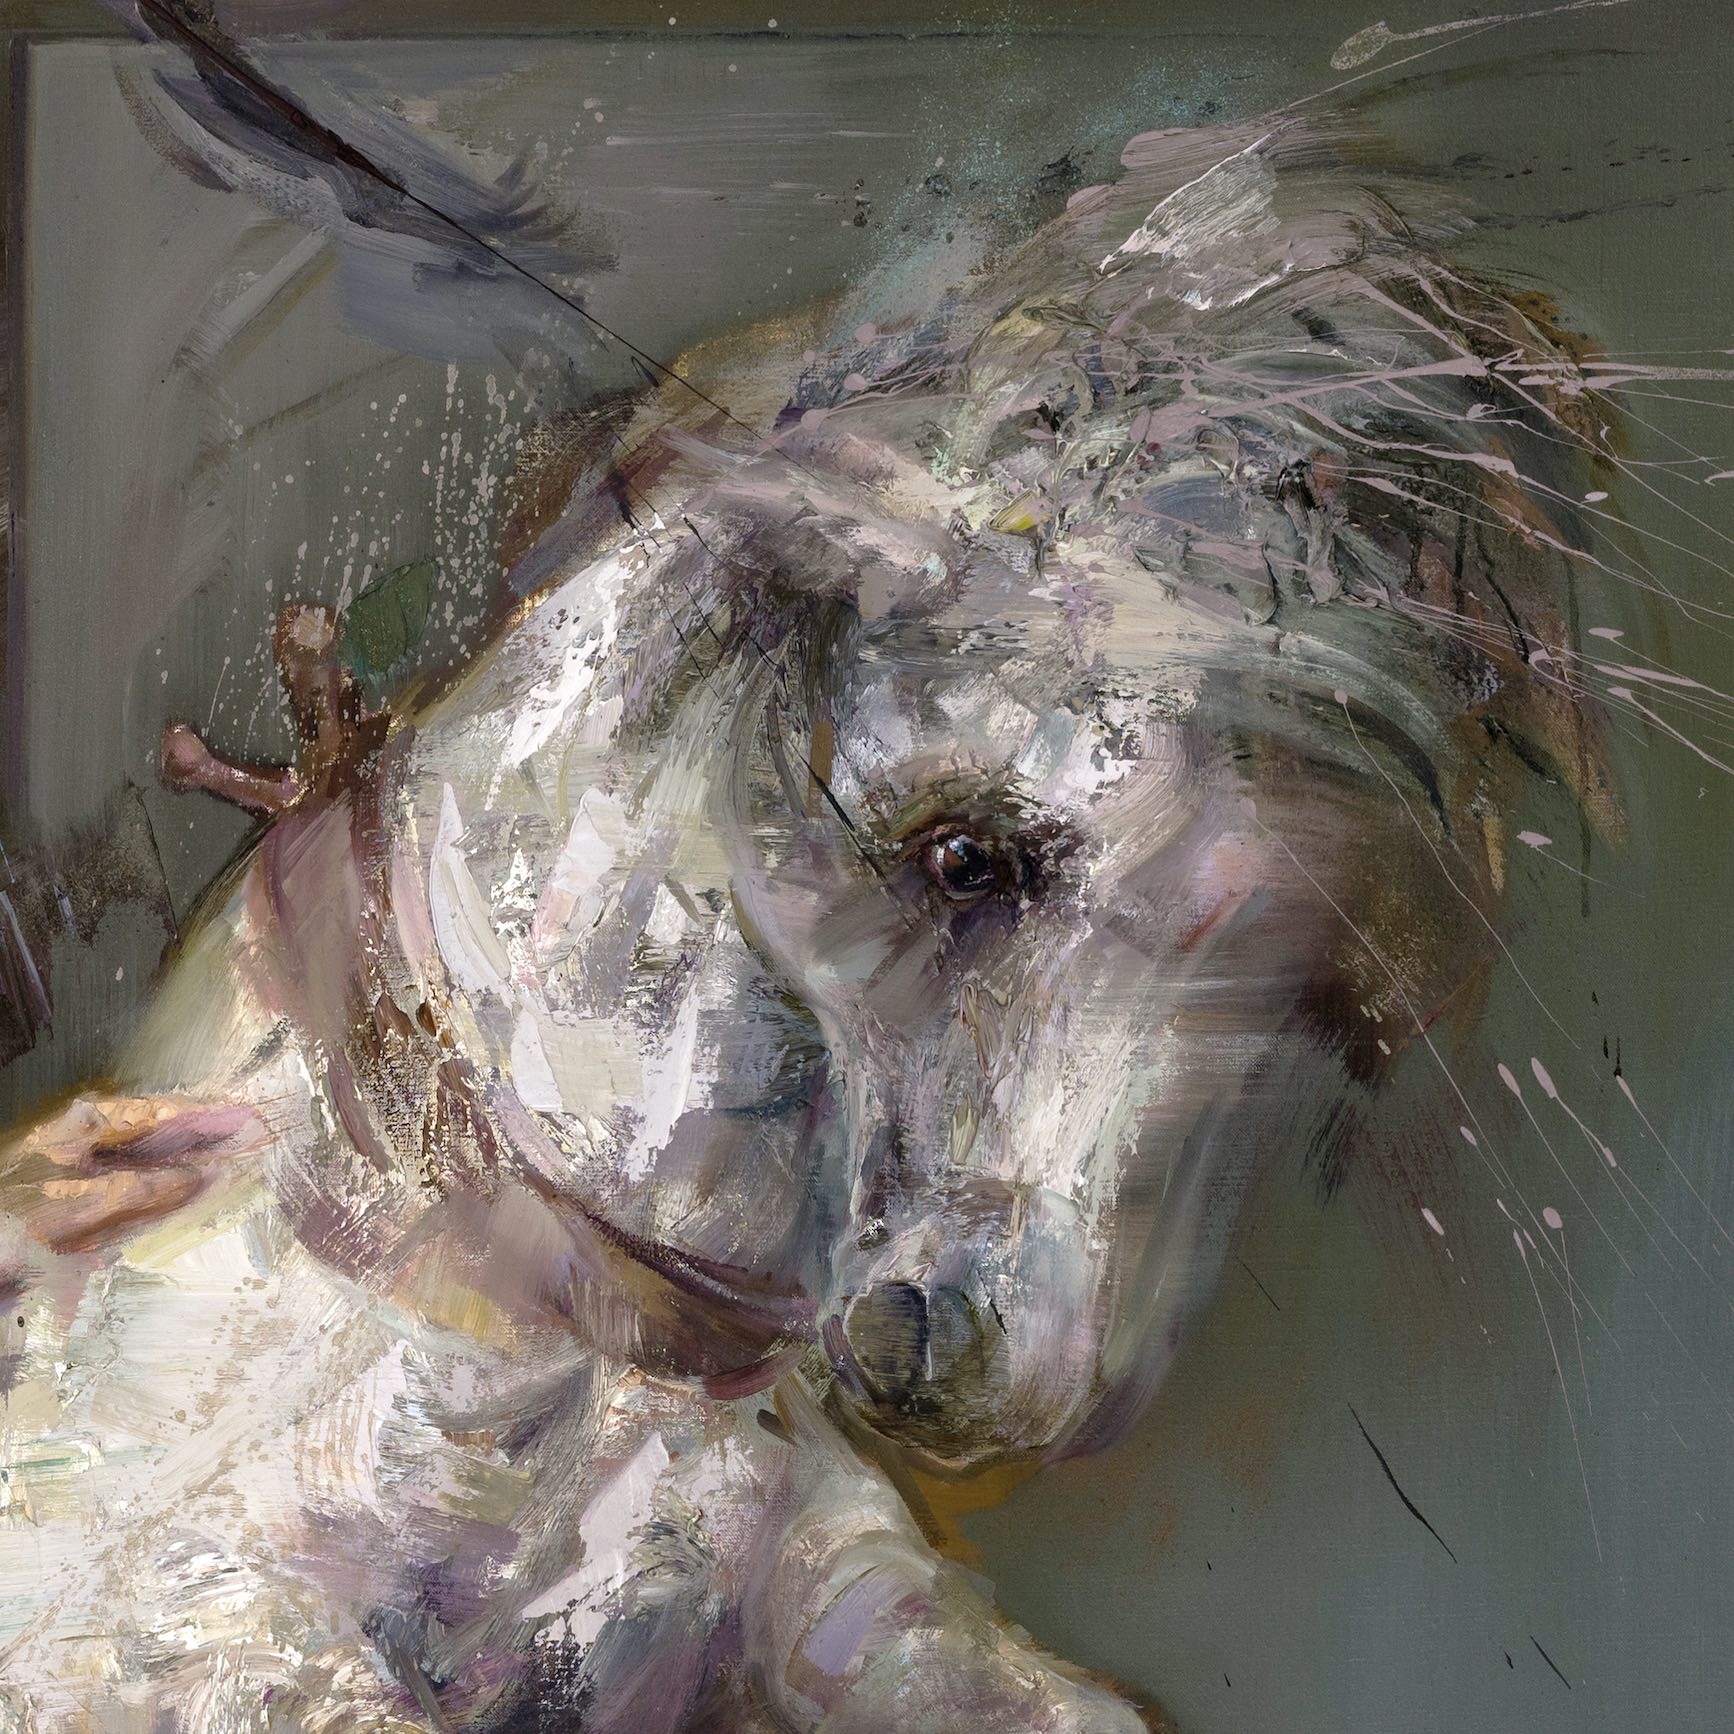 A detail of Mathieu Laca's painting, "The Turin Horse".